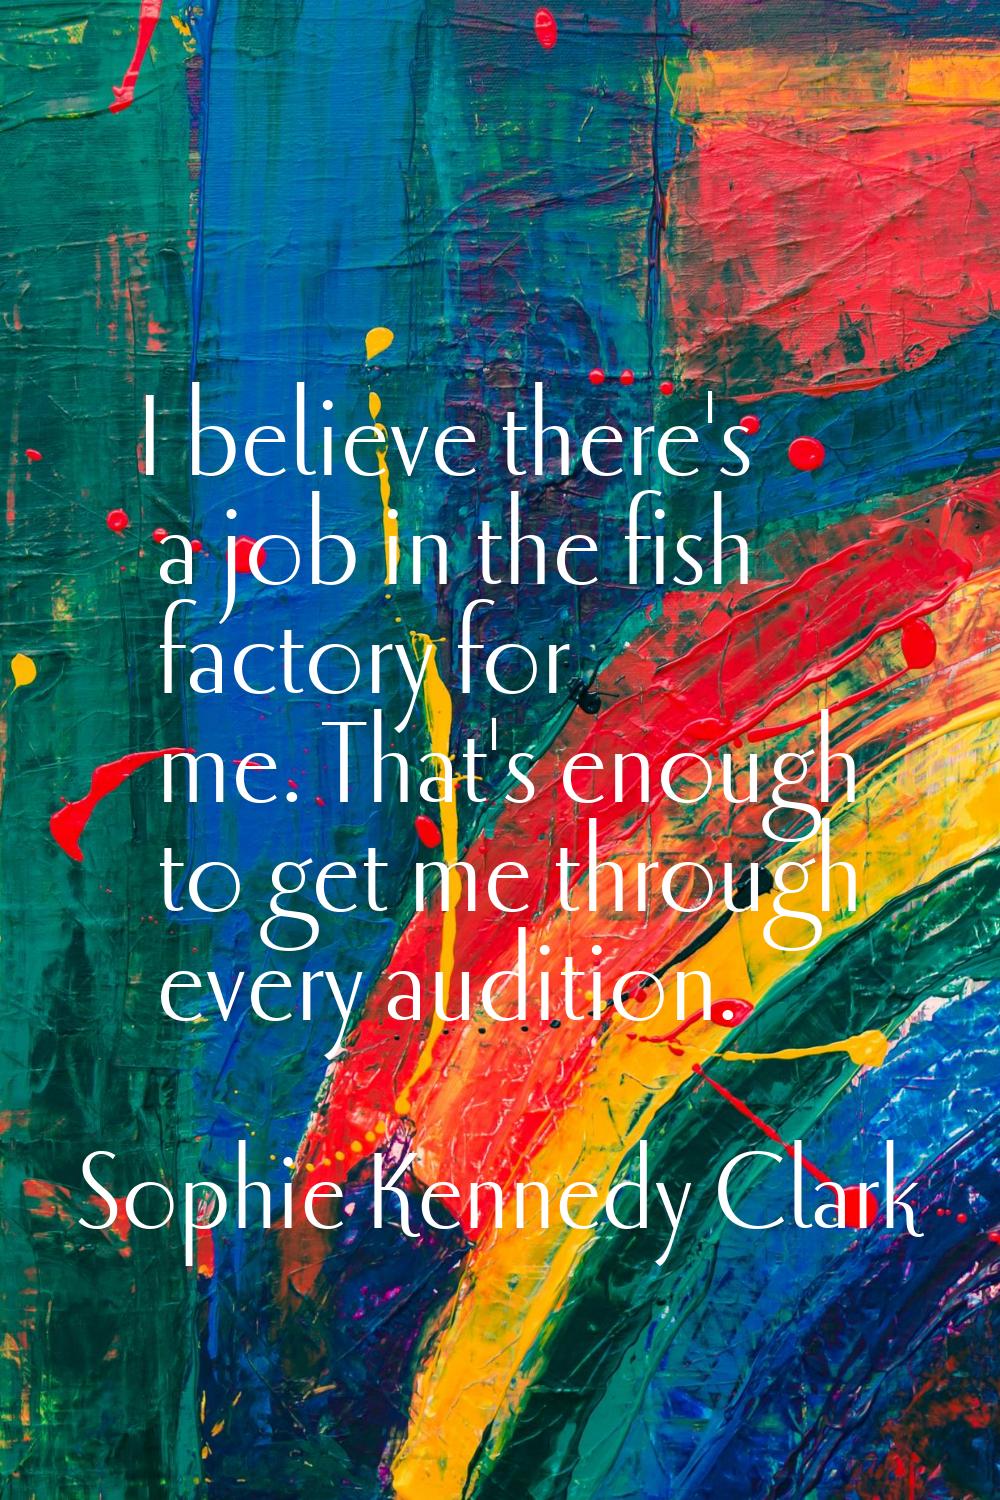 I believe there's a job in the fish factory for me. That's enough to get me through every audition.